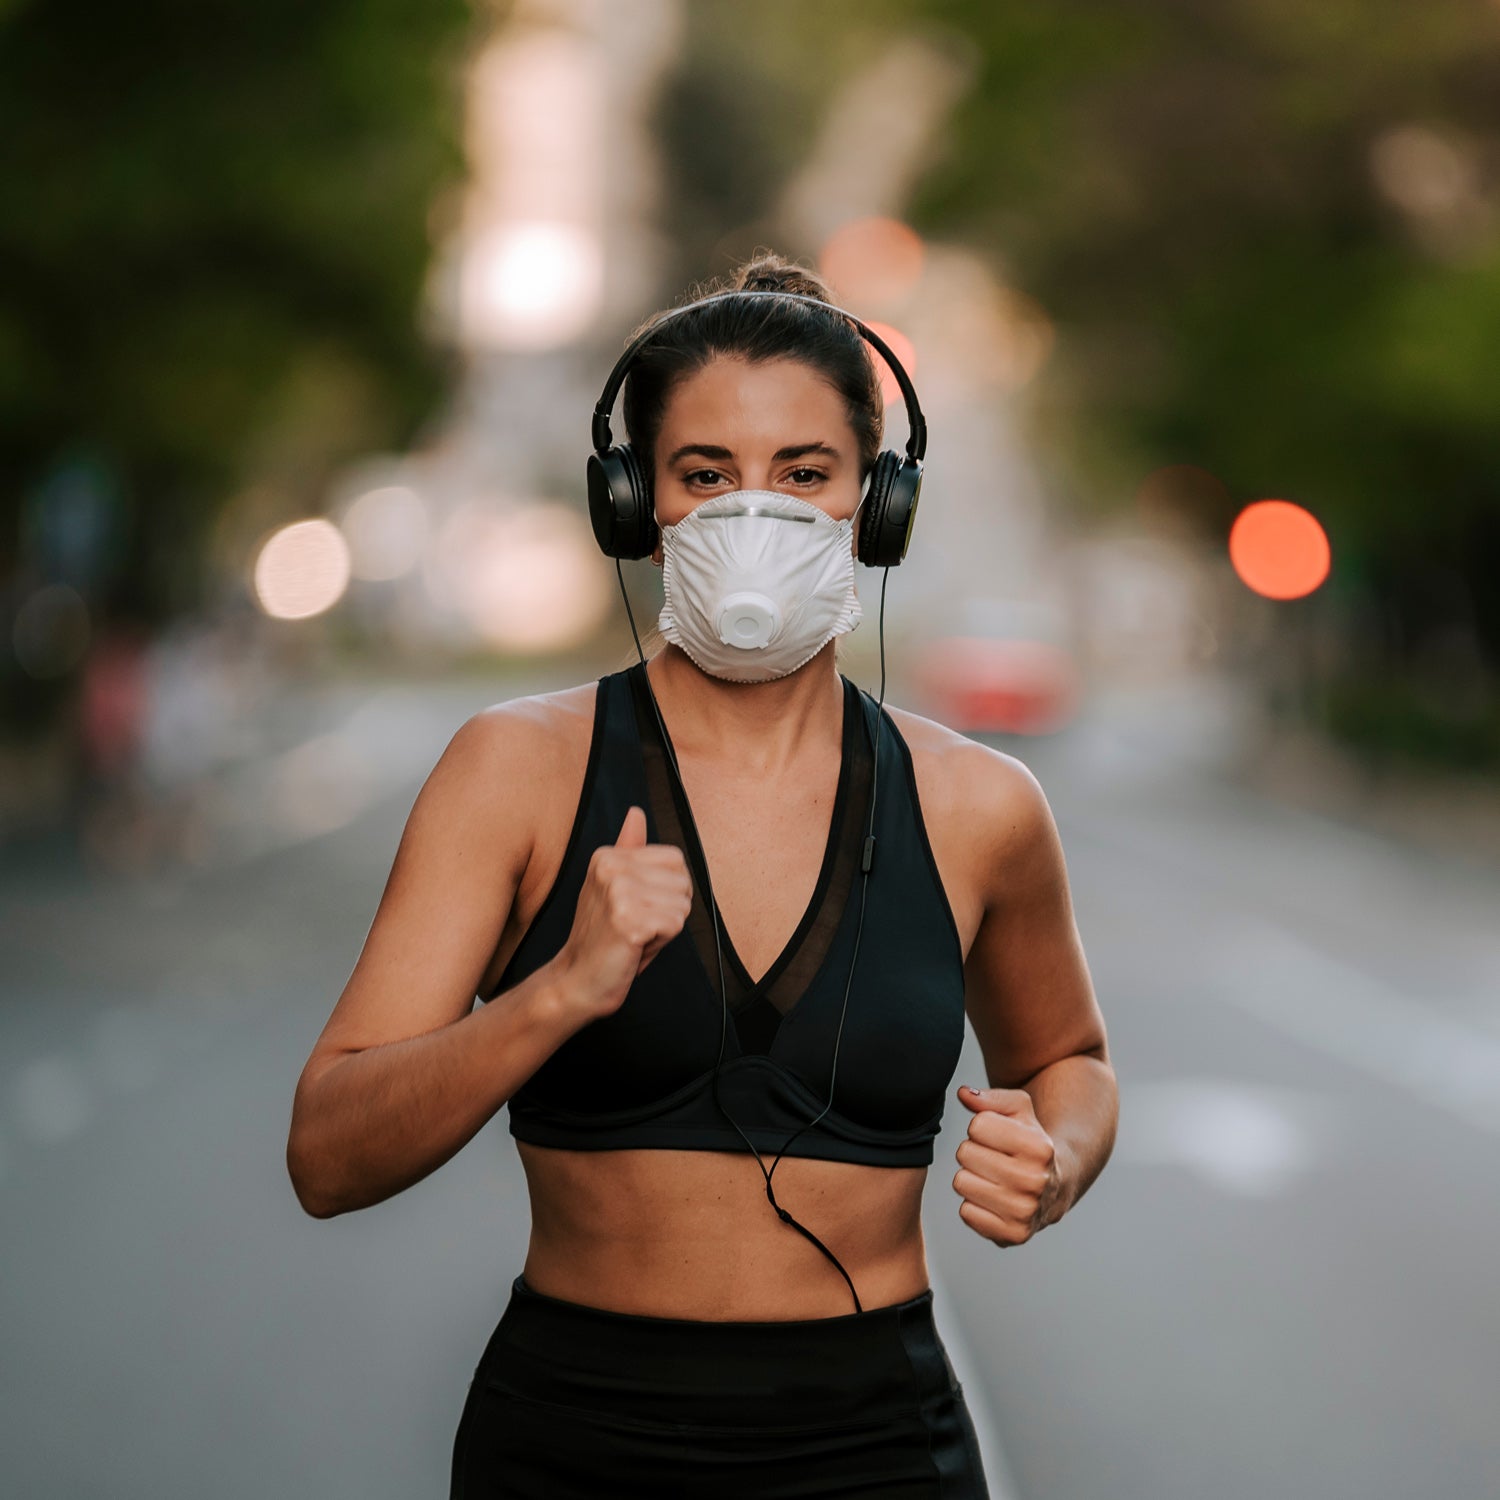 Is Exercising With A Face Mask Dangerous?